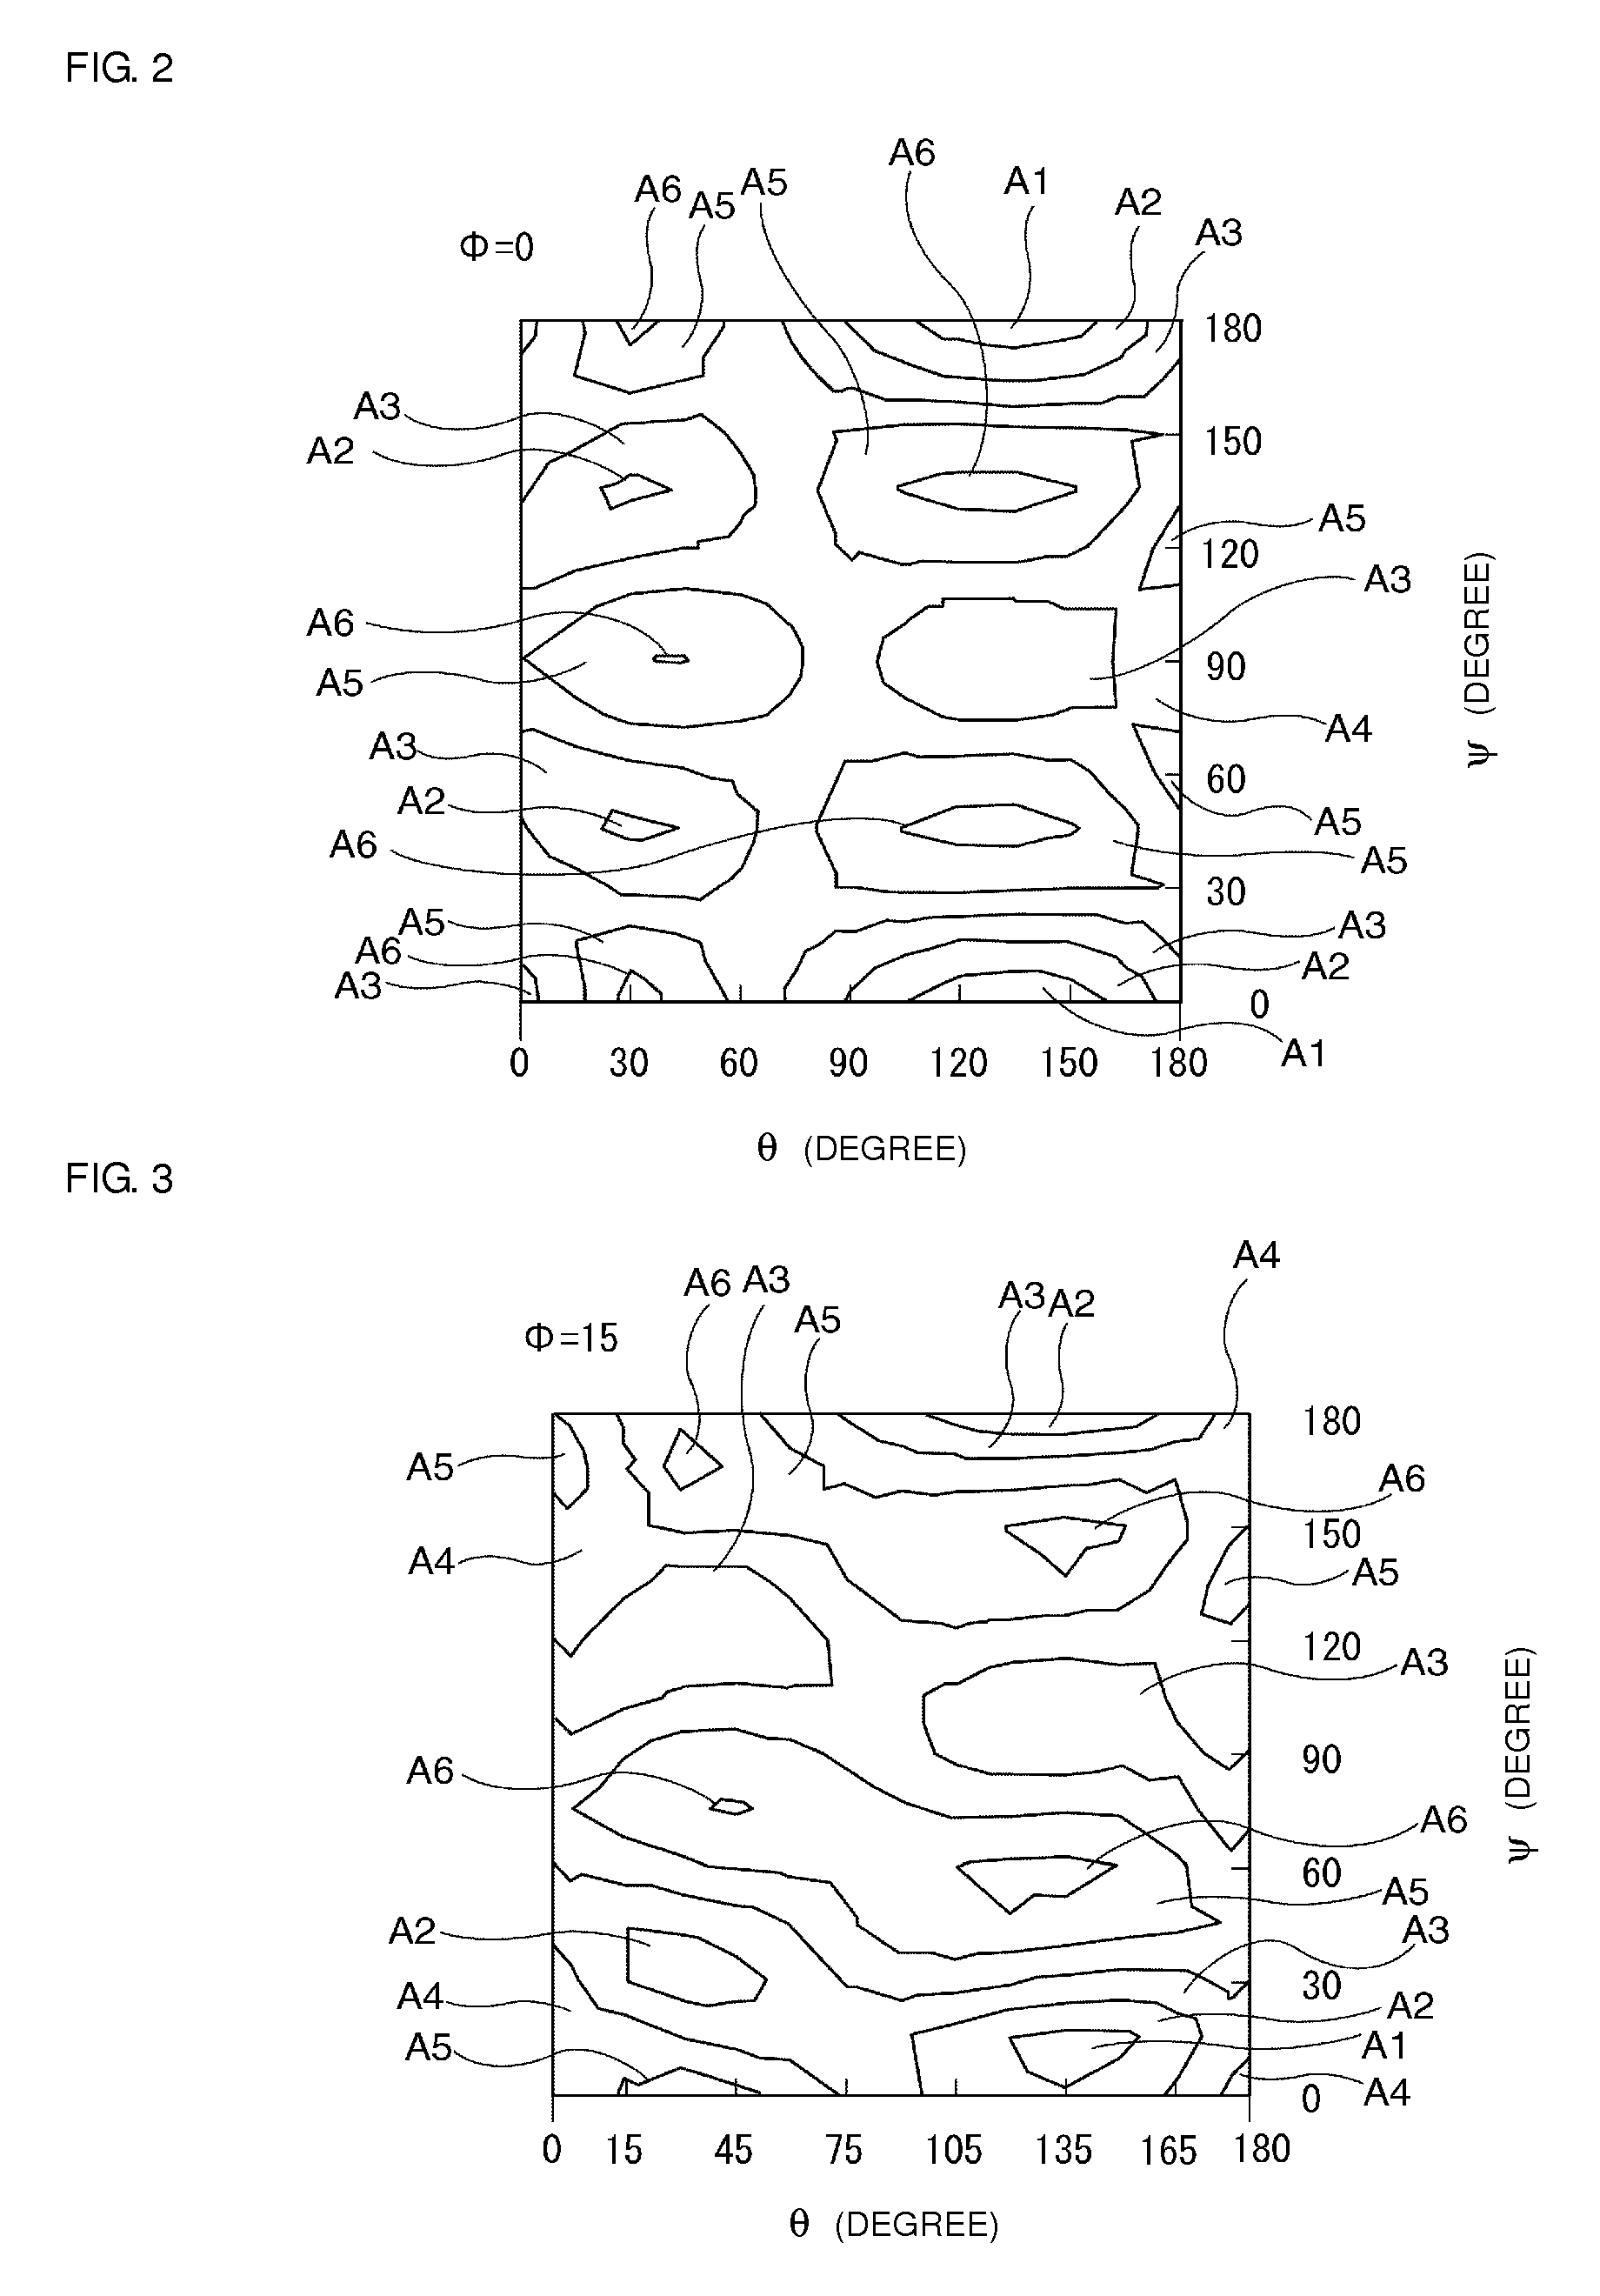 Surface acoustic wave device including a confinement layer